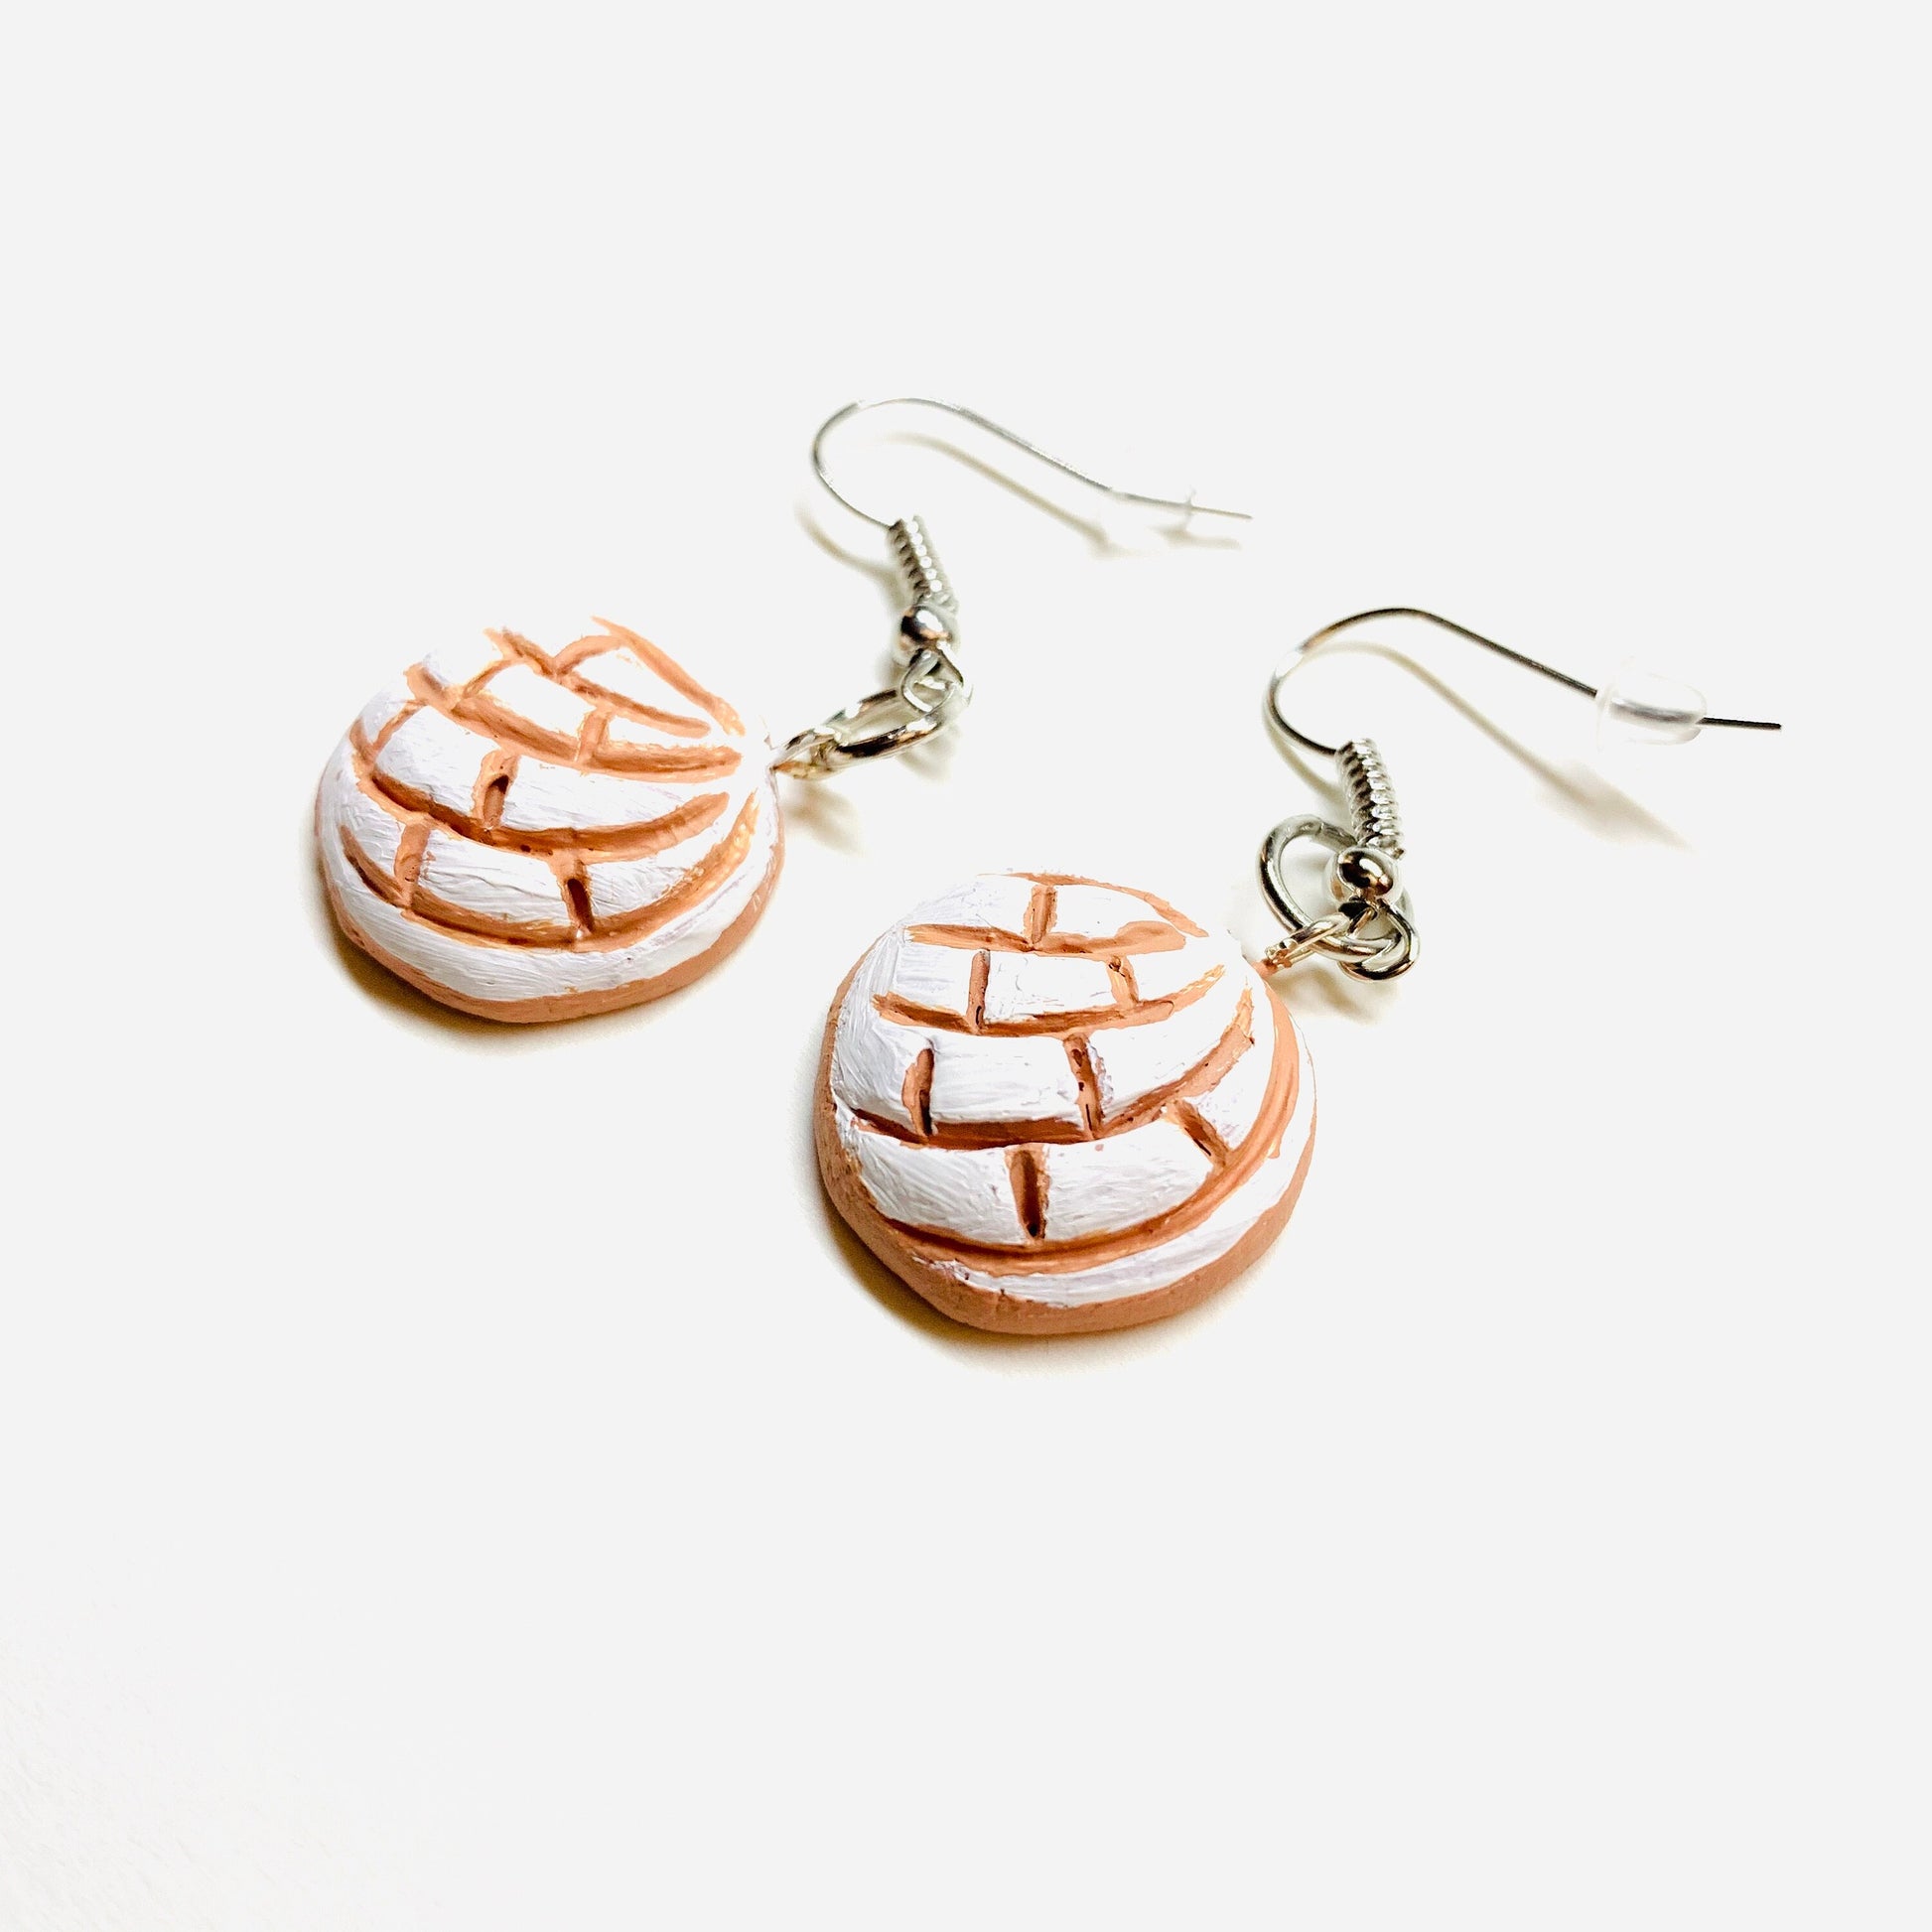 Charming Vanilla Concha Earrings Clay Food Jewelry Mexican Sweet Bread Artisan Mexico Folk Art Pand Dulce Conchitas Hand Painted Gift Girls